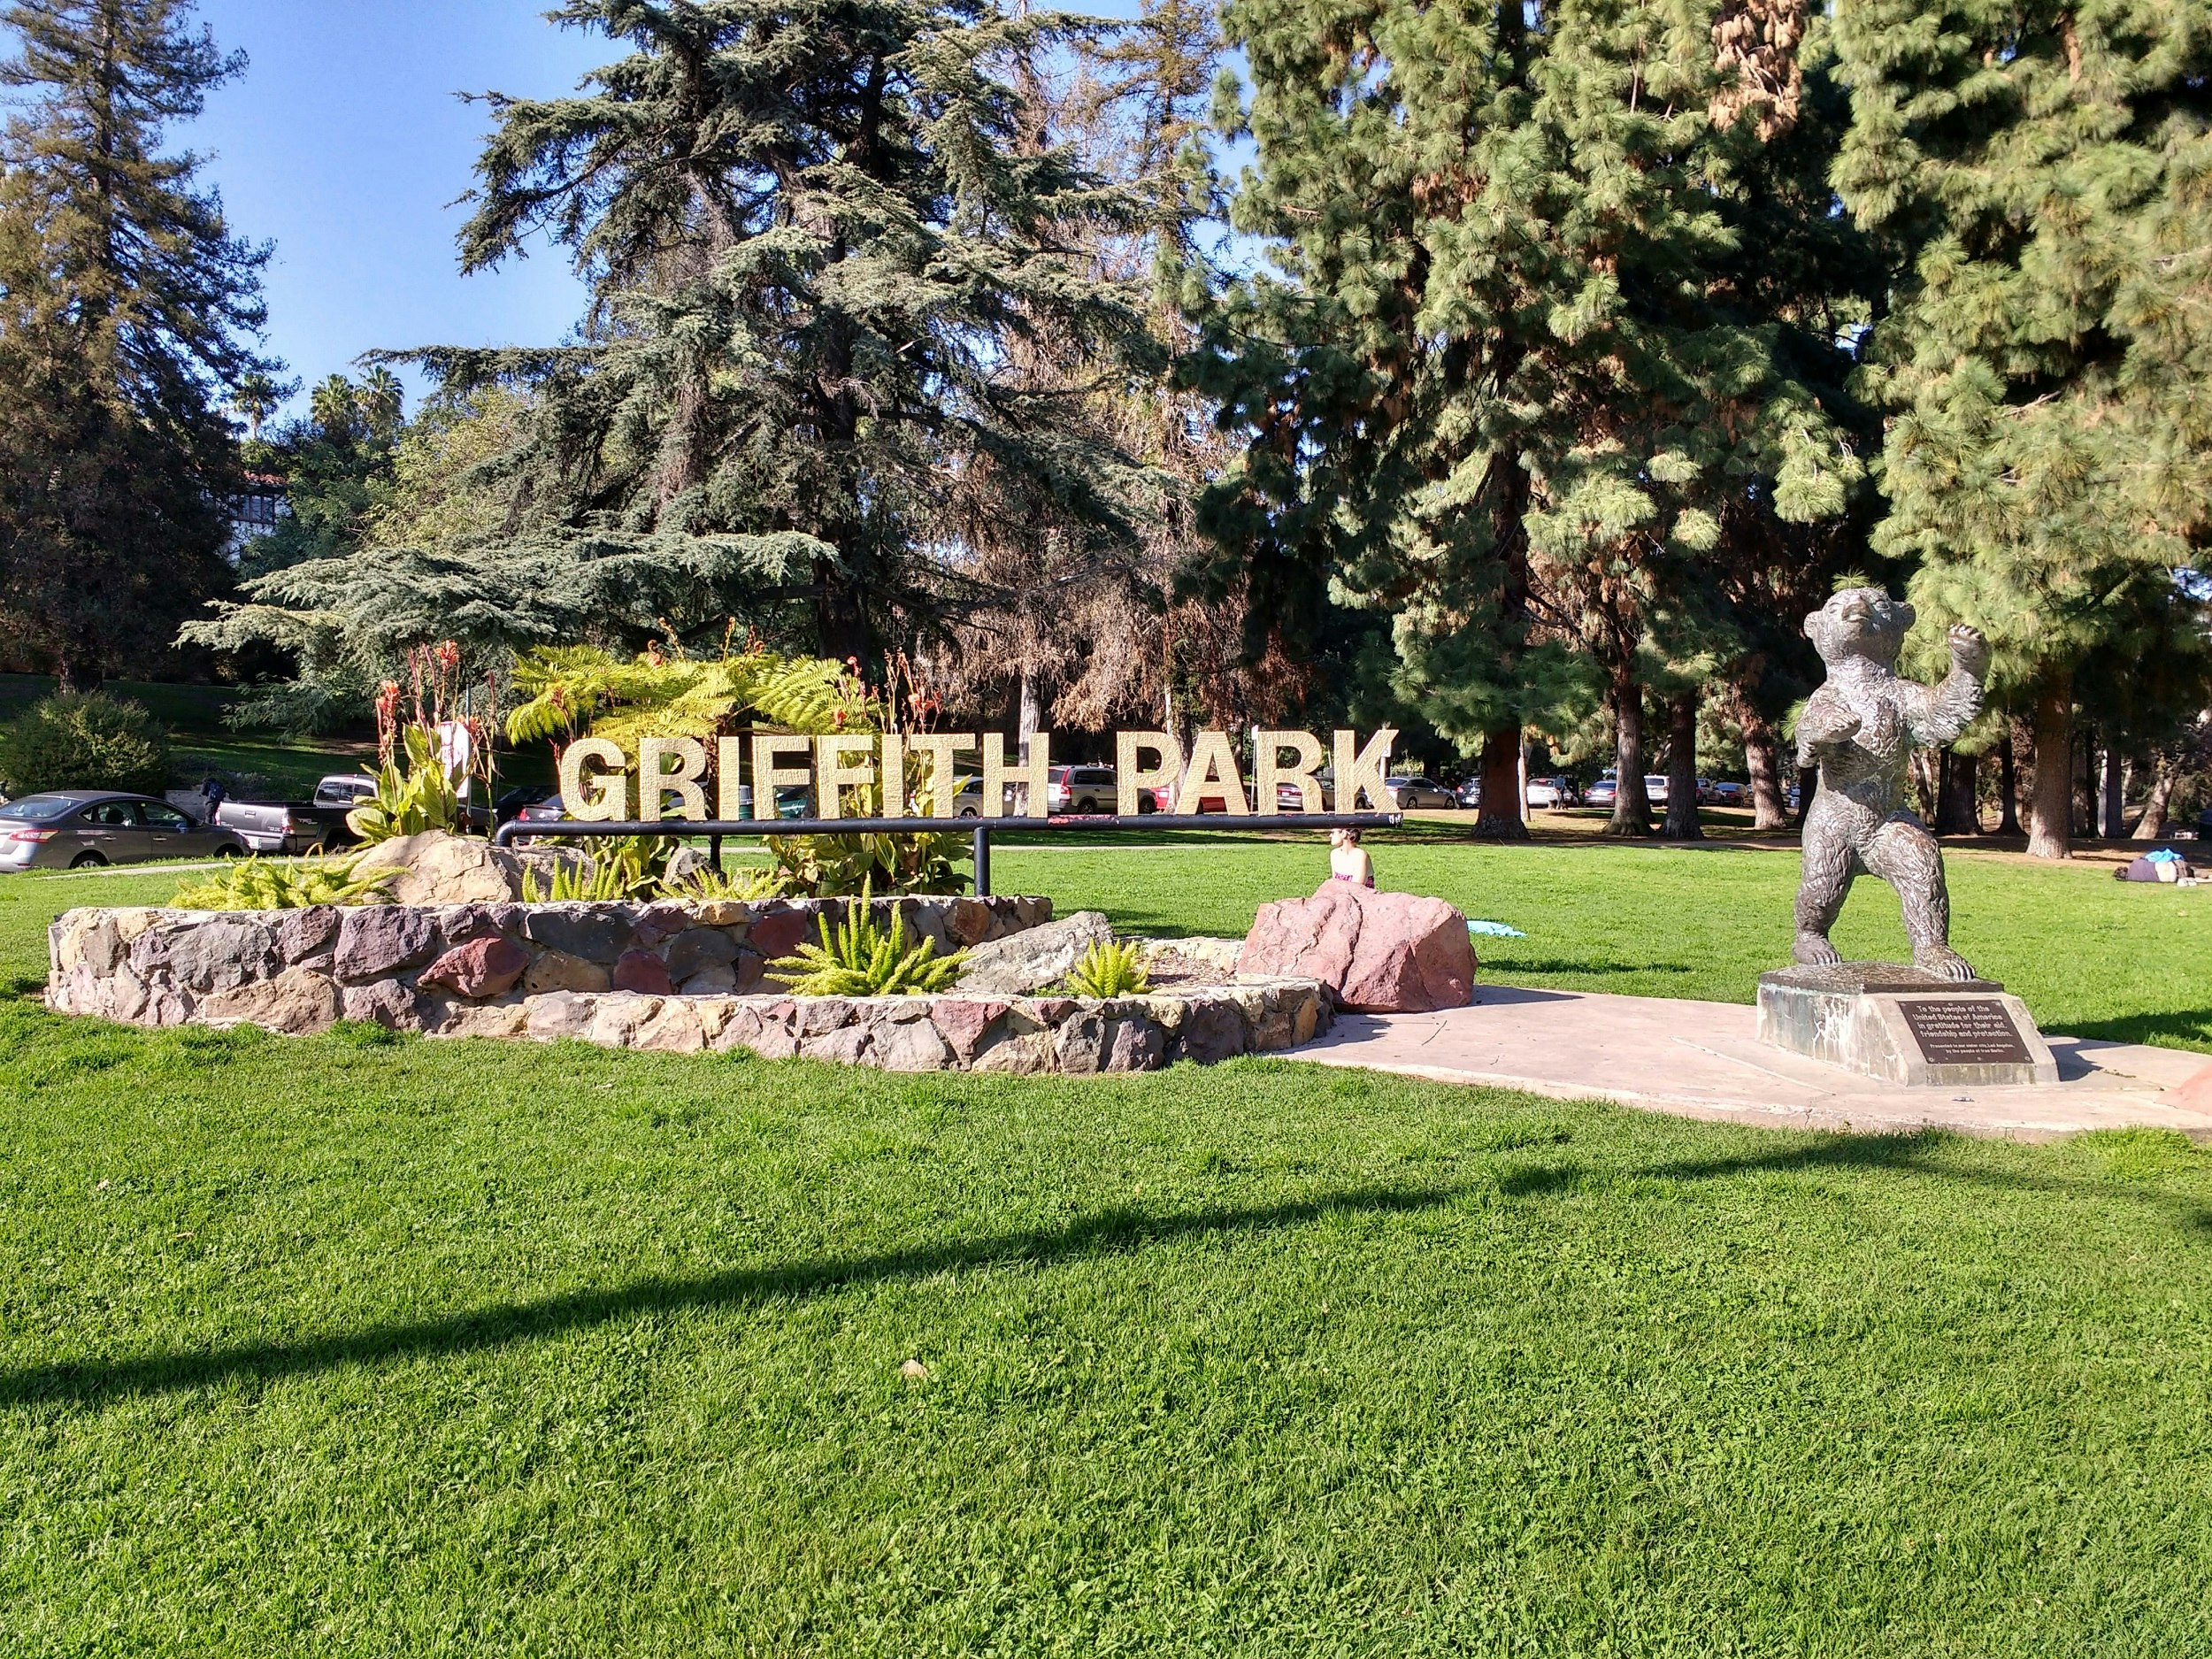 A Griffith Park sign of individual block letters stands over a rock-garden surrounded by lawns and backed by trees; a bronze bear statue stands nearby.